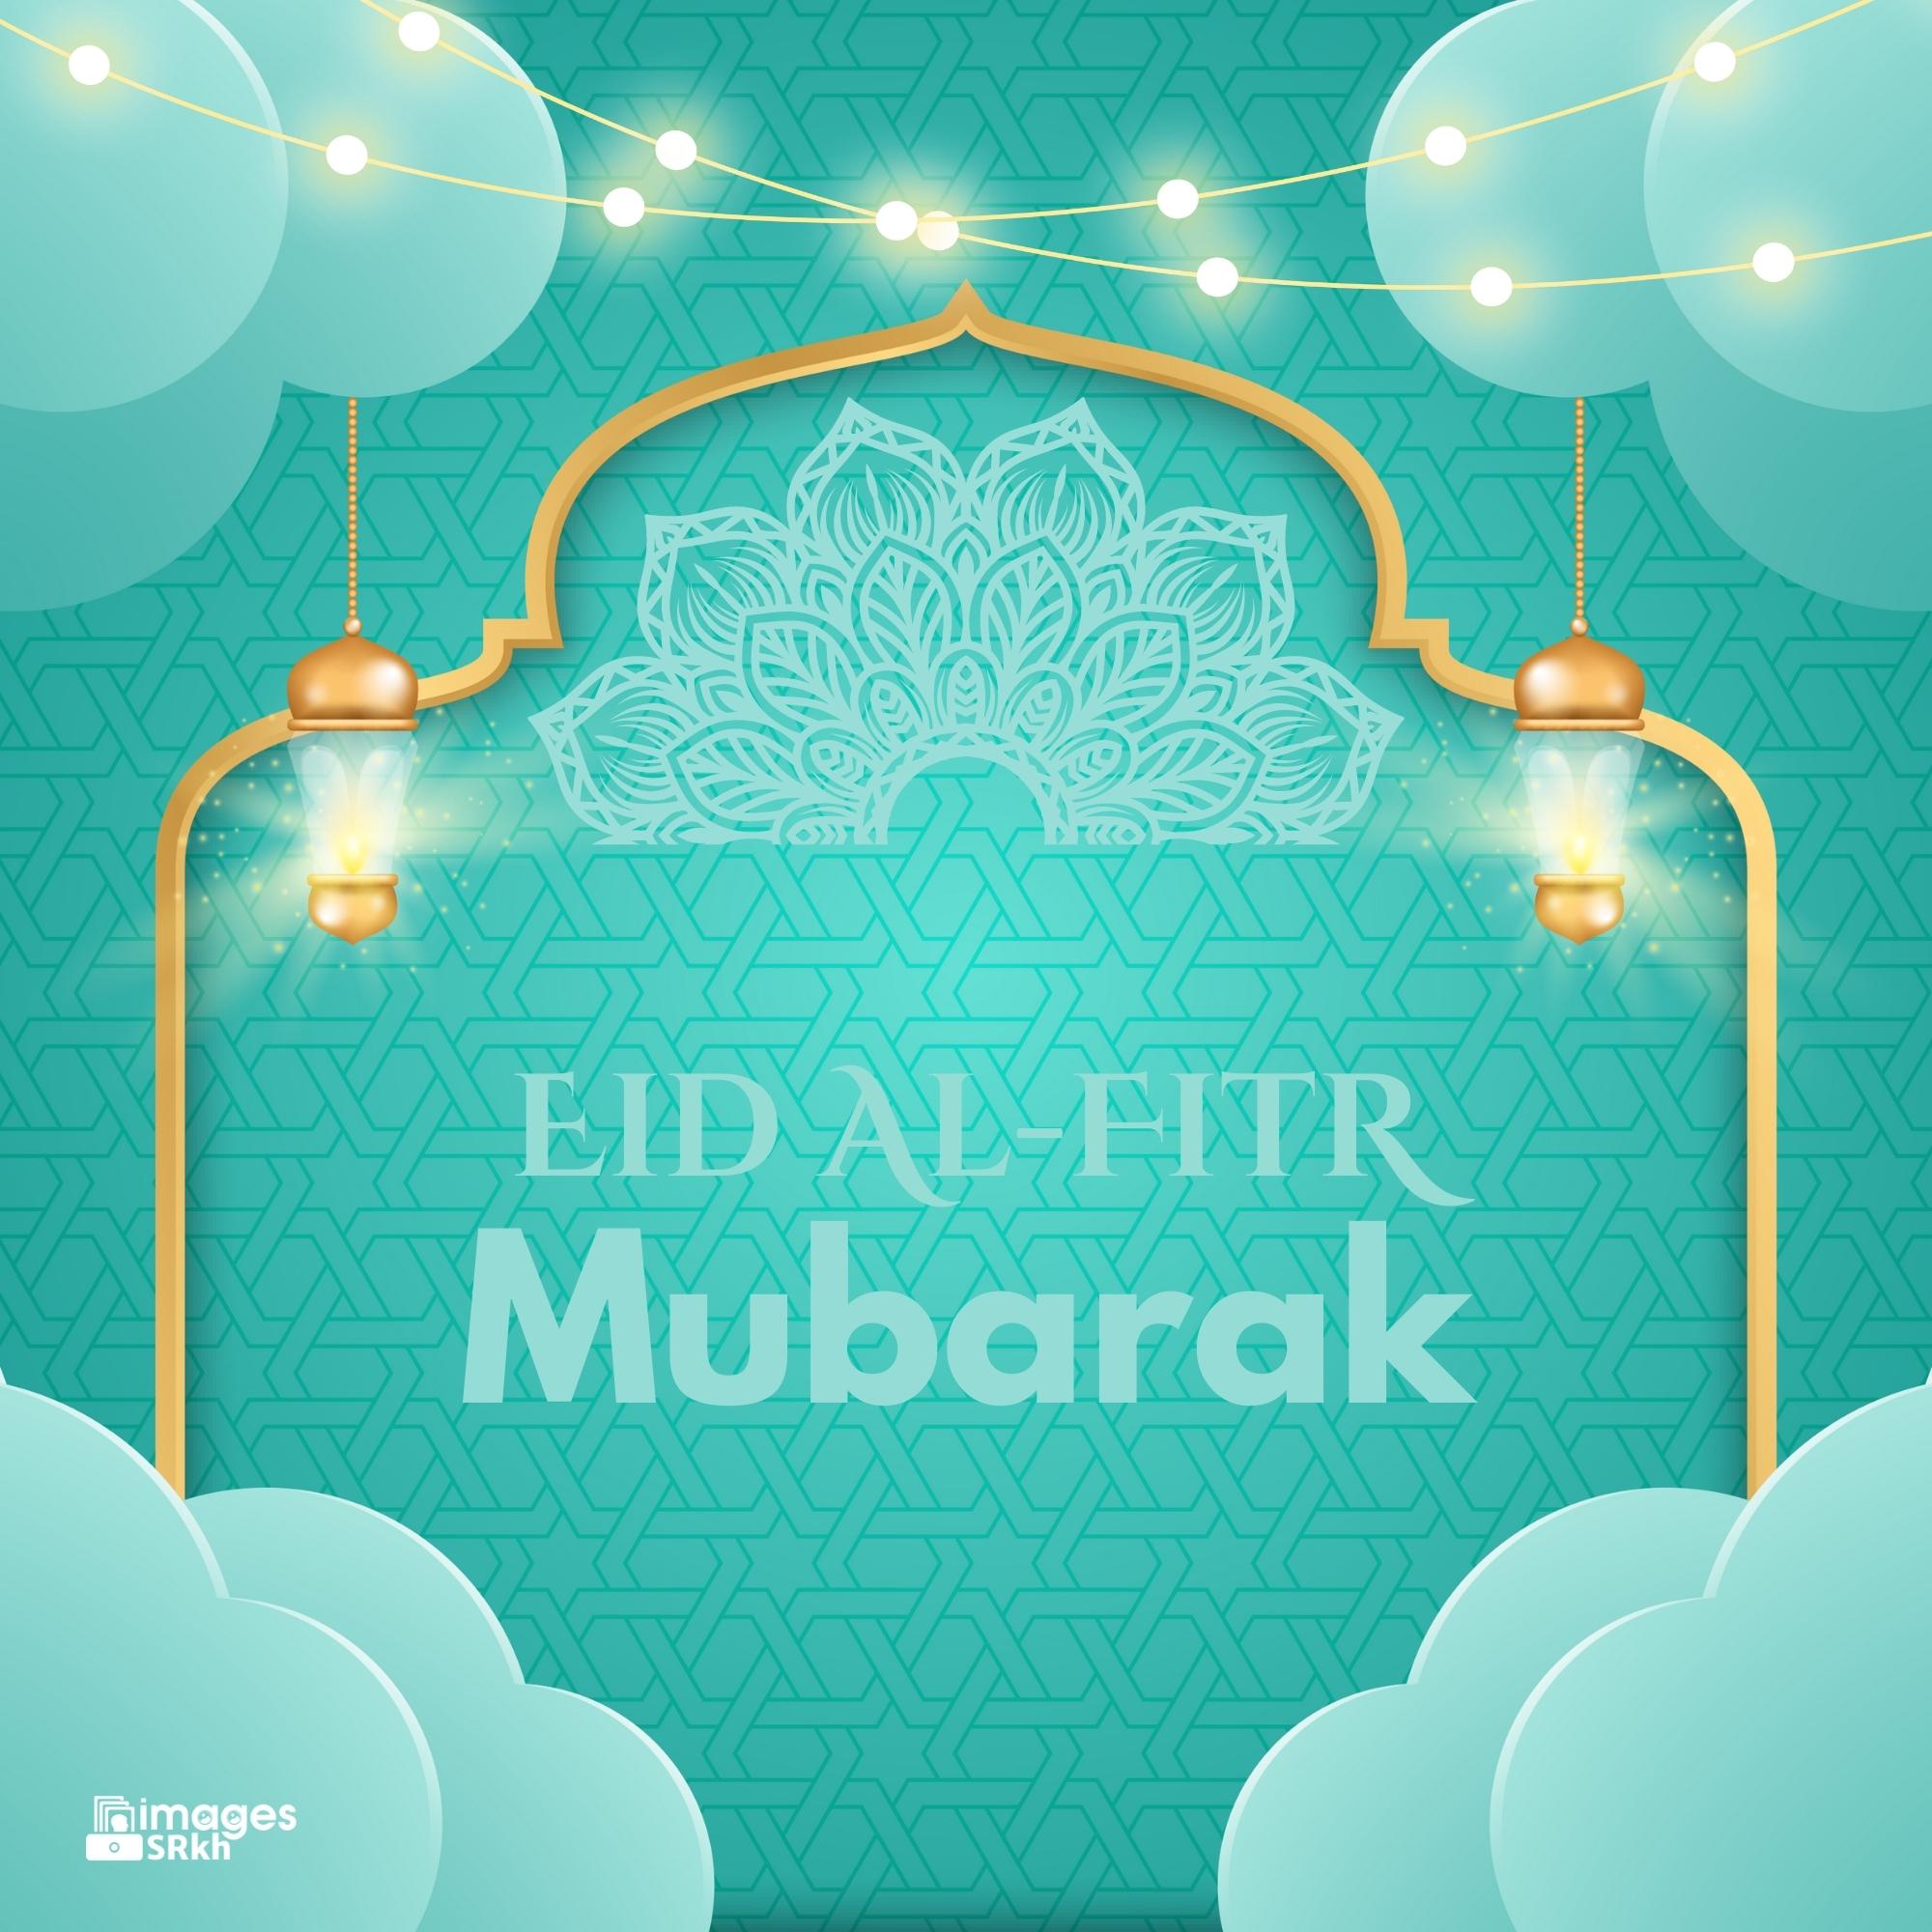 Pictures Eid Mubarak (9) | Download free in Hd Quality | imagesSRkh